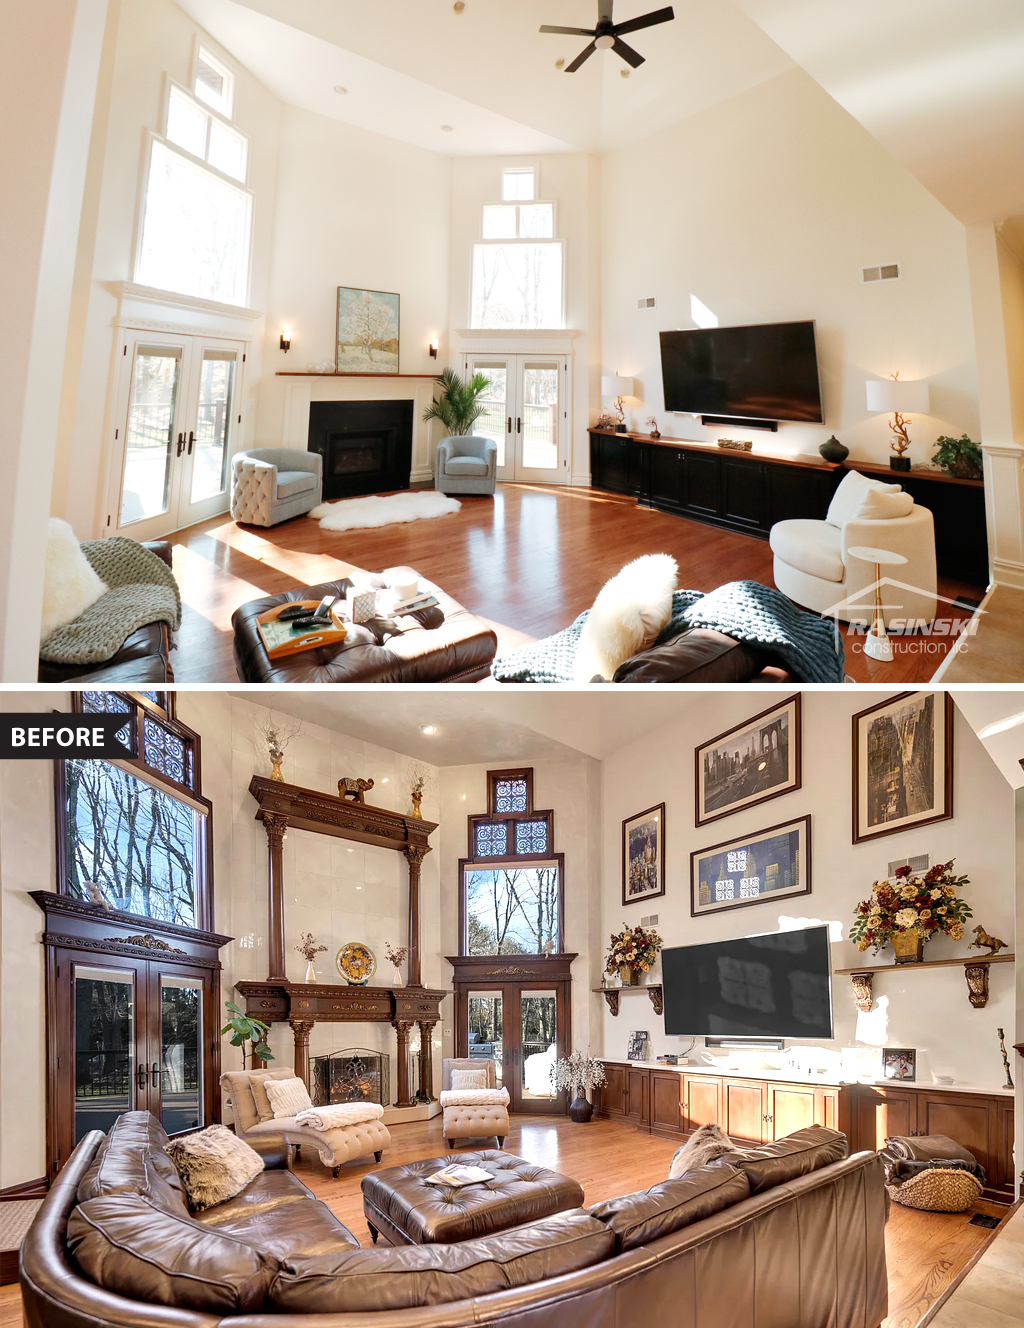 Before and After photos of a home remodel in Colts Neck NJ completed by Rasinski Construction